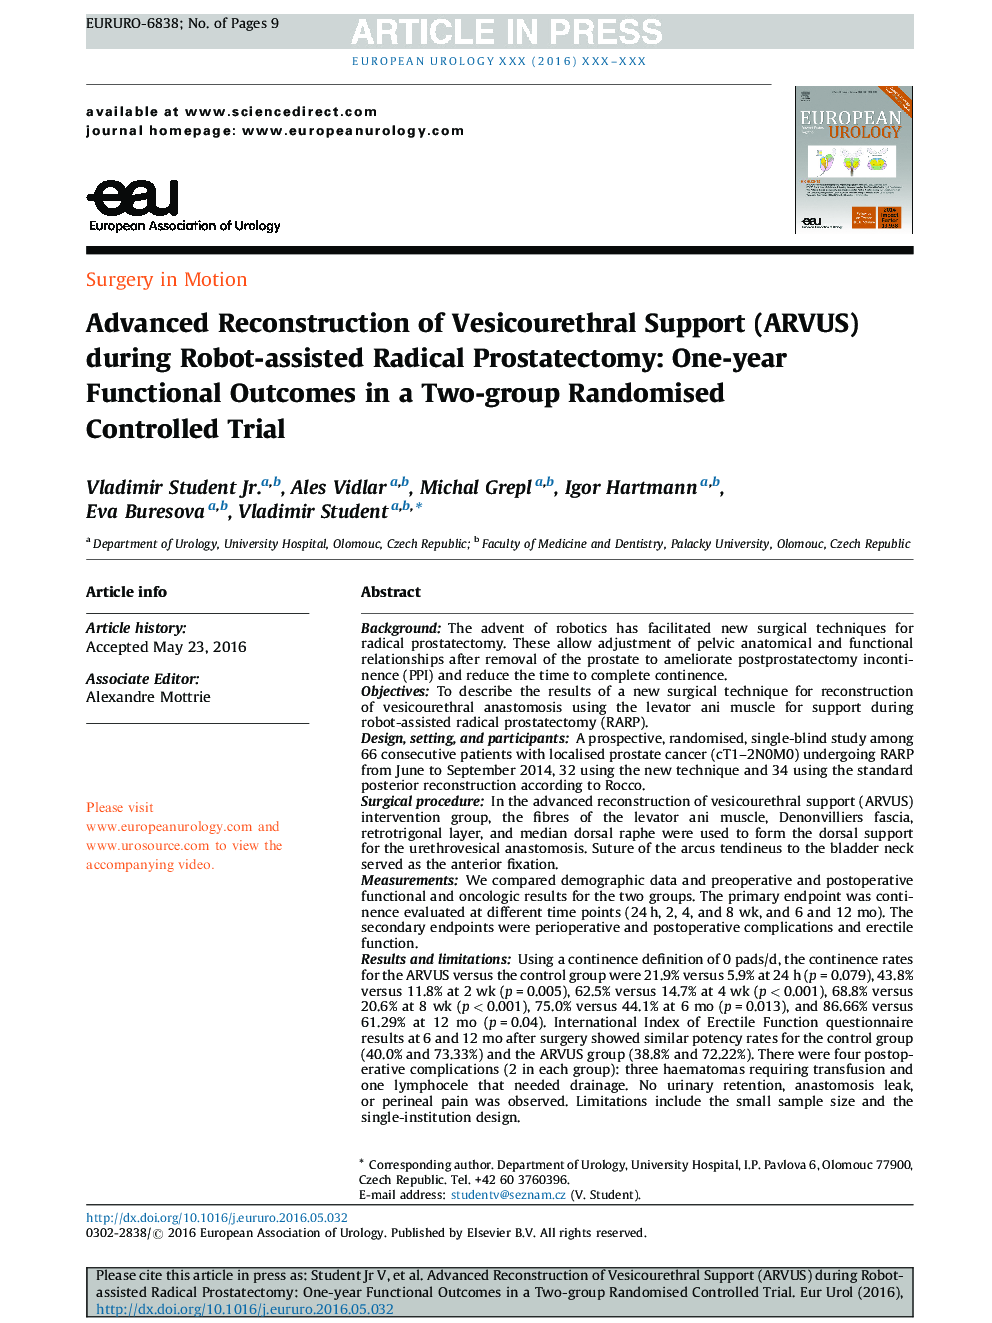 Advanced Reconstruction of Vesicourethral Support (ARVUS) during Robot-assisted Radical Prostatectomy: One-year Functional Outcomes in a Two-group Randomised Controlled Trial